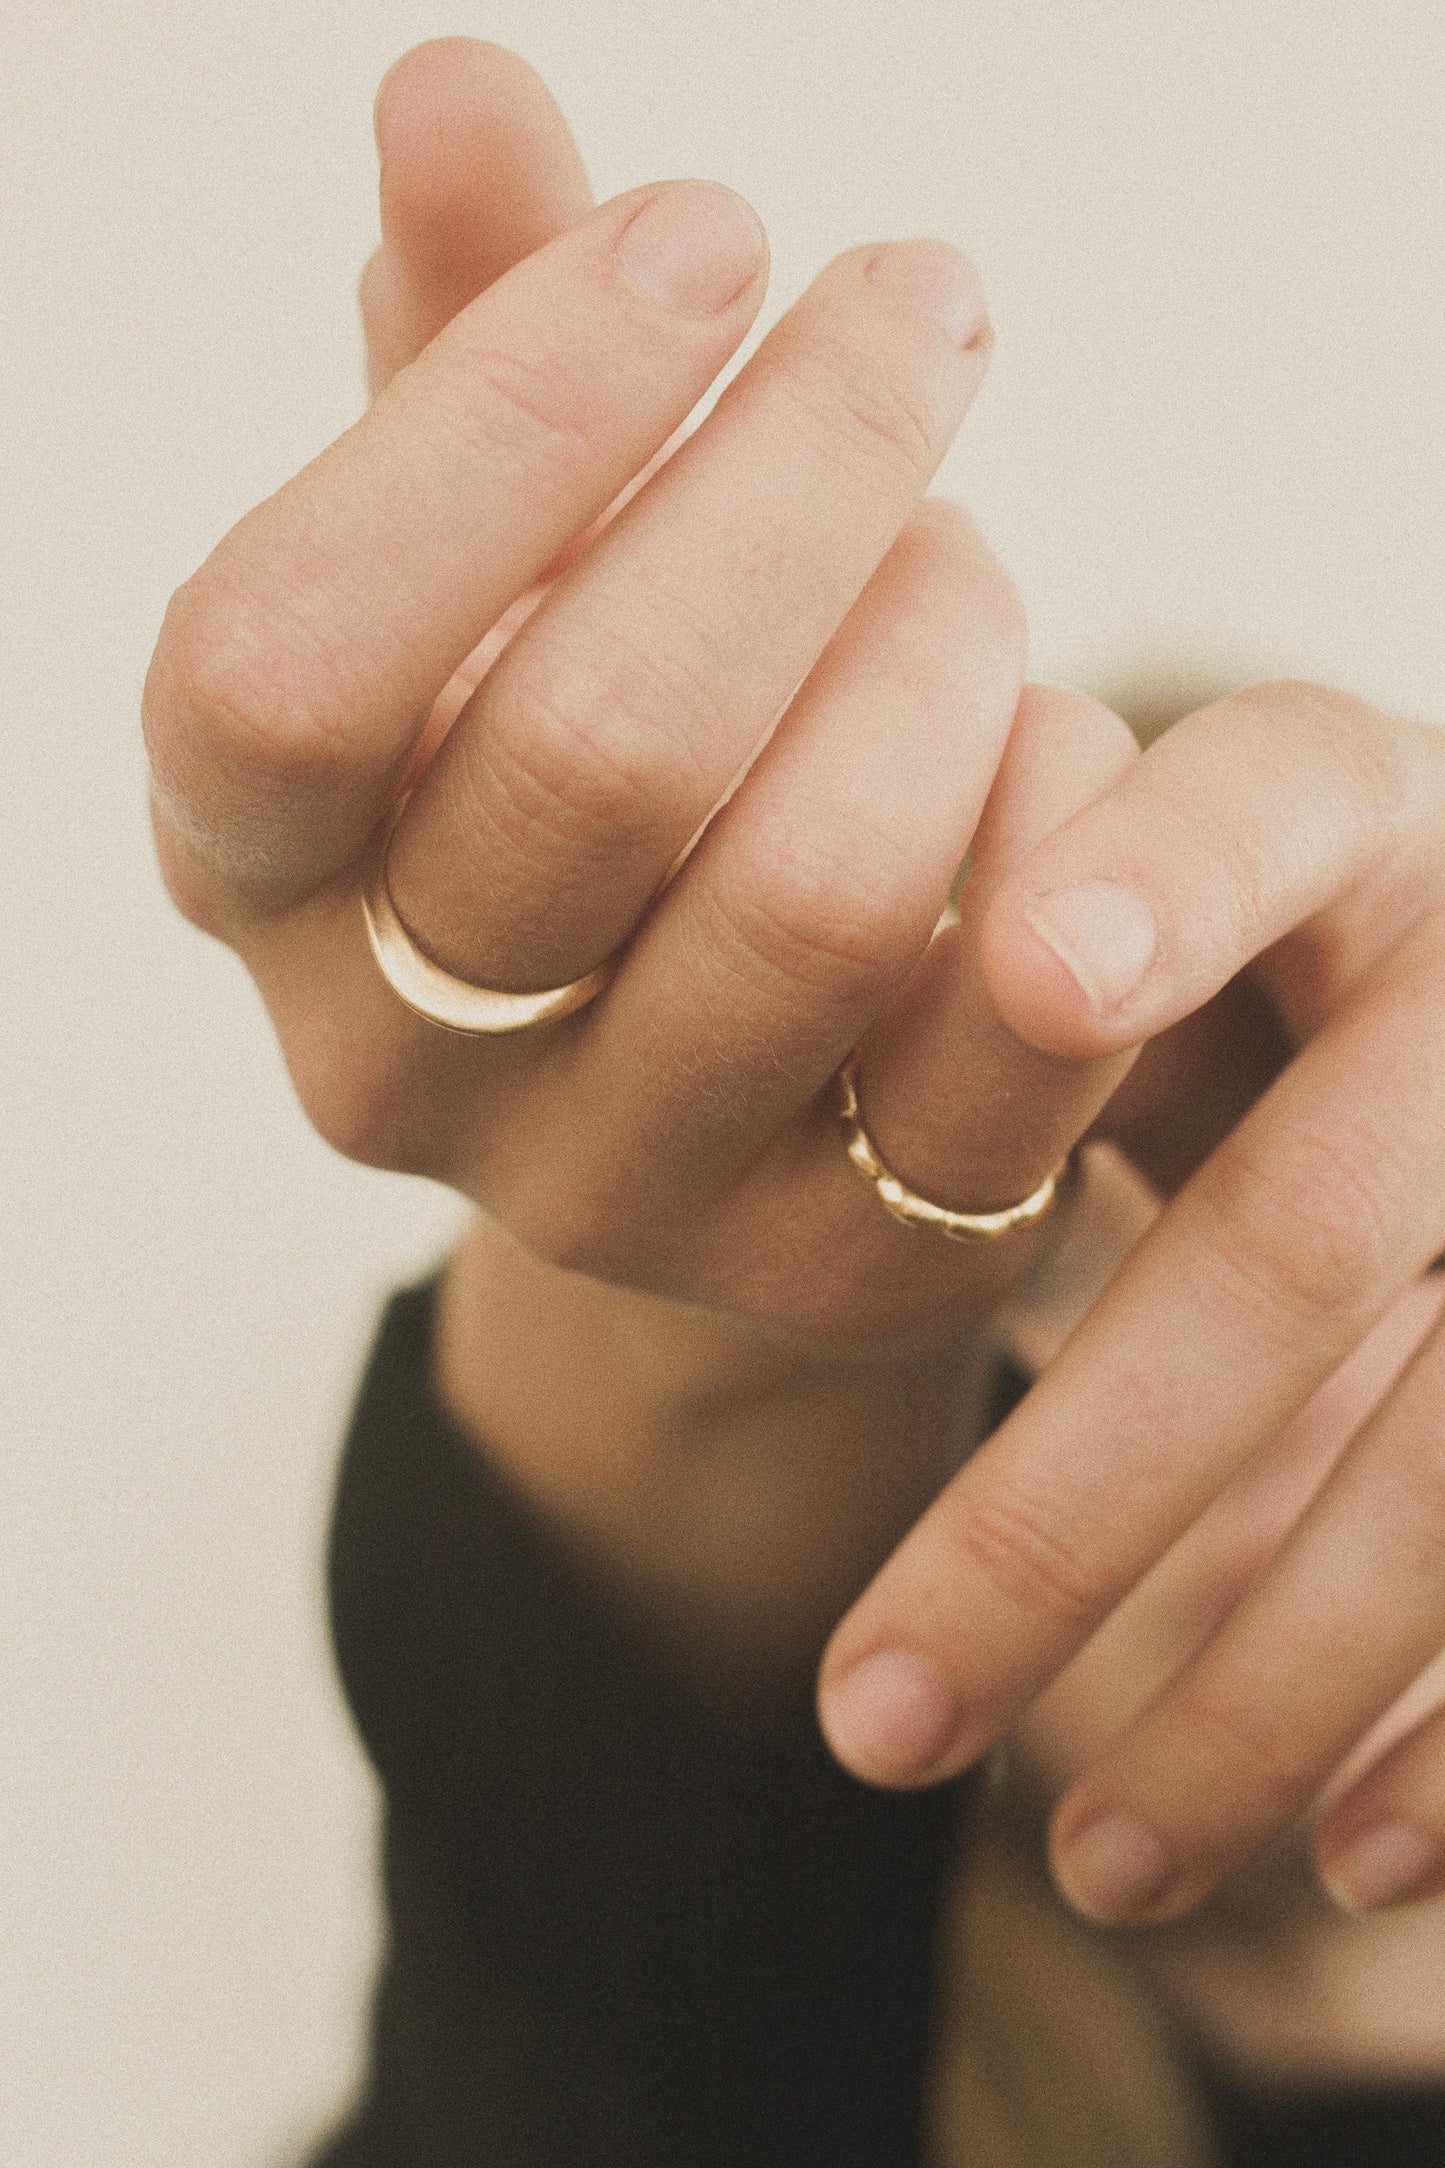 Ojai Ring by Mountainside Jewelry. This sleek and sculptural hand-carved design is a true standout when worn alone, or stacked with your other favorites. Perfect worn alone, to compliment other ring styles, or stacked with other pieces. Handmade in the Santa Cruz Mountains.